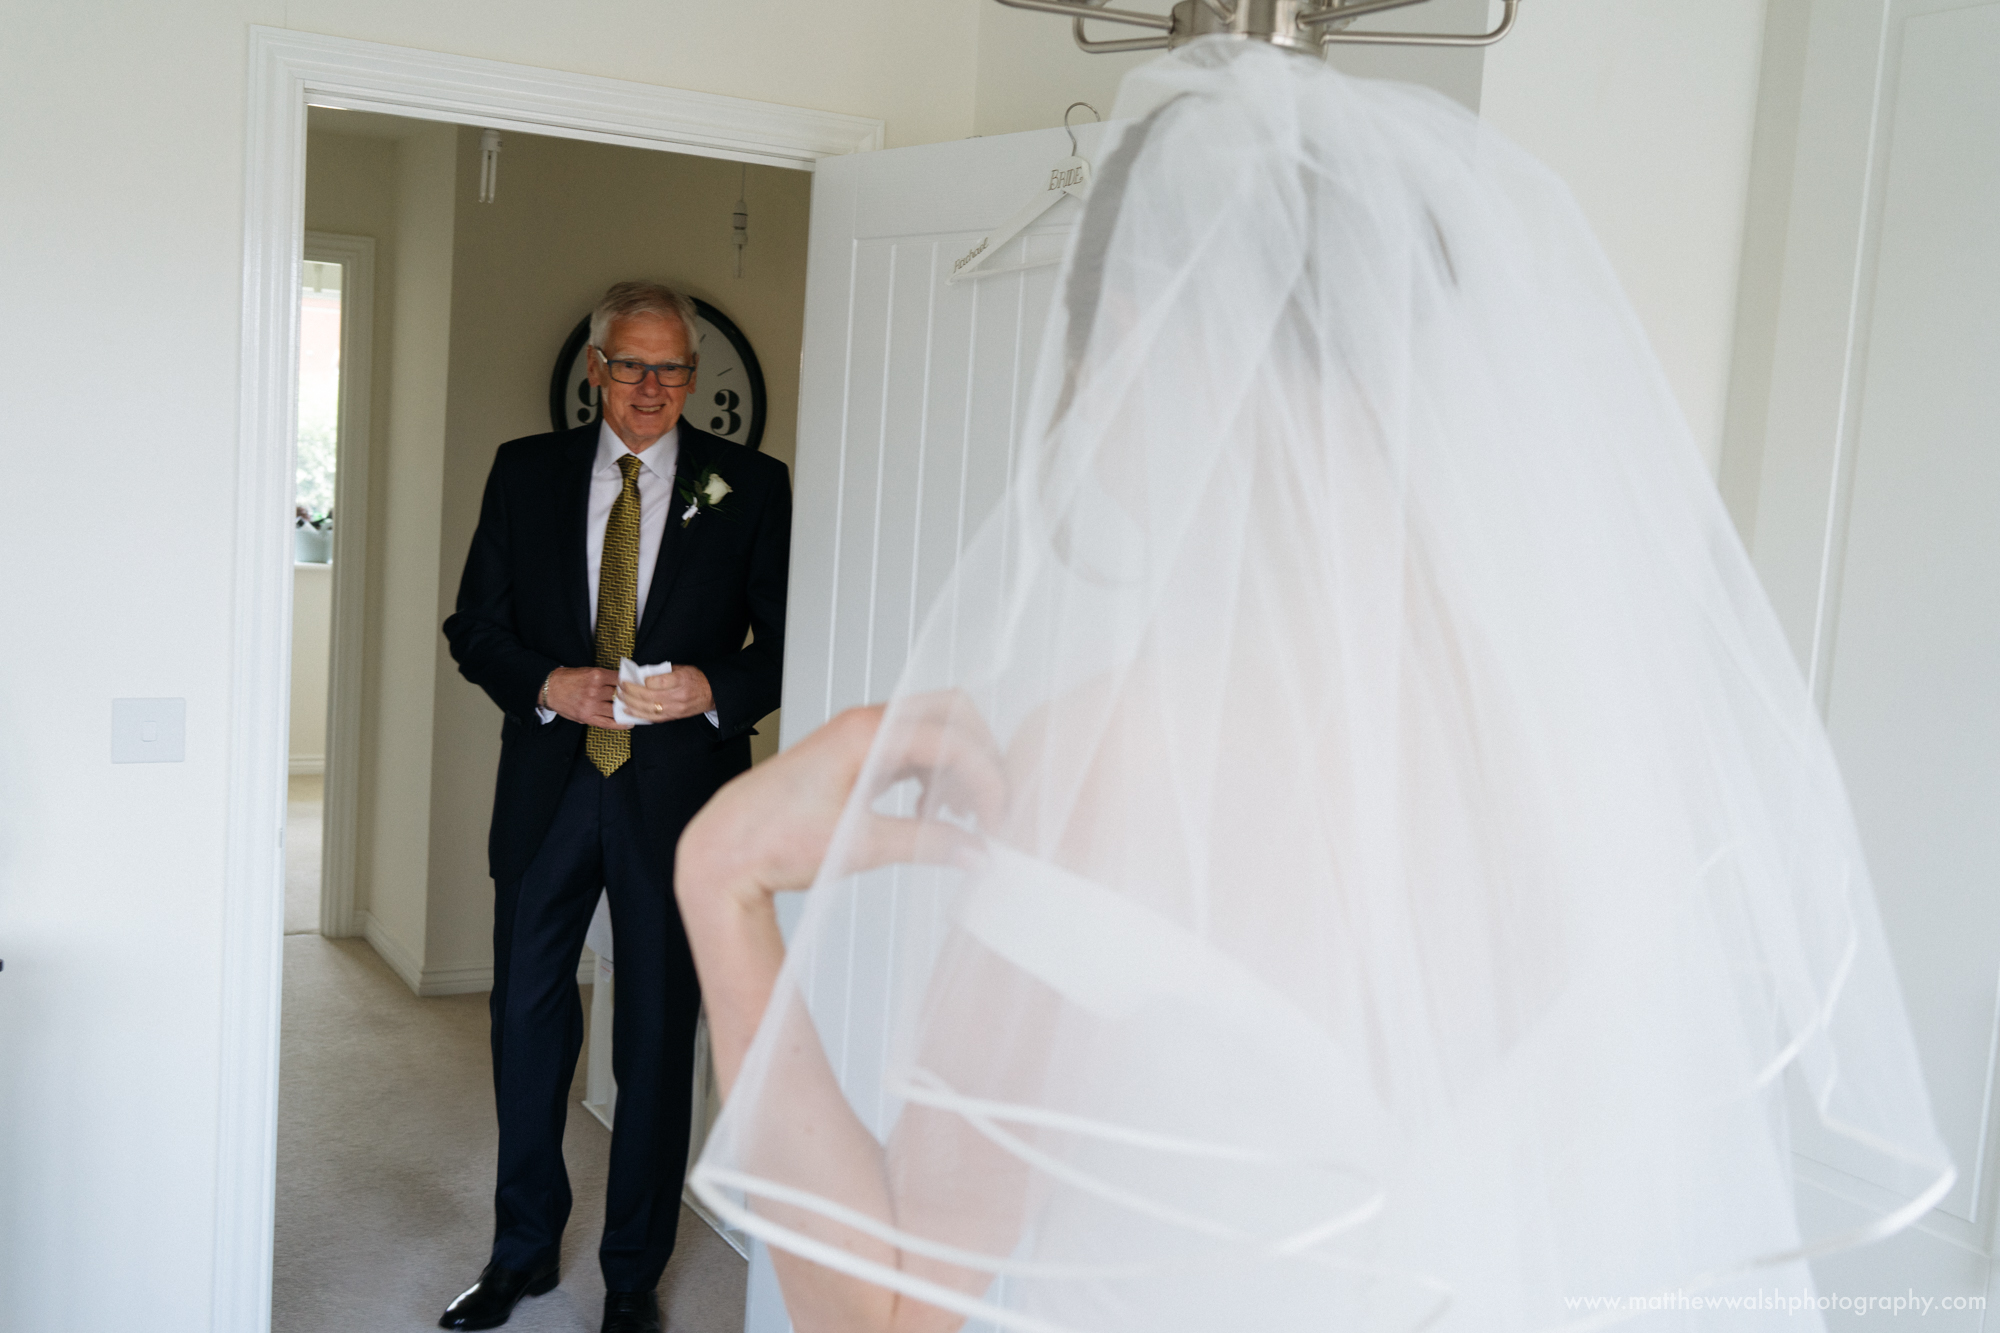 The first look as the father of the bride sees his daughter in her wedding dress for the first time